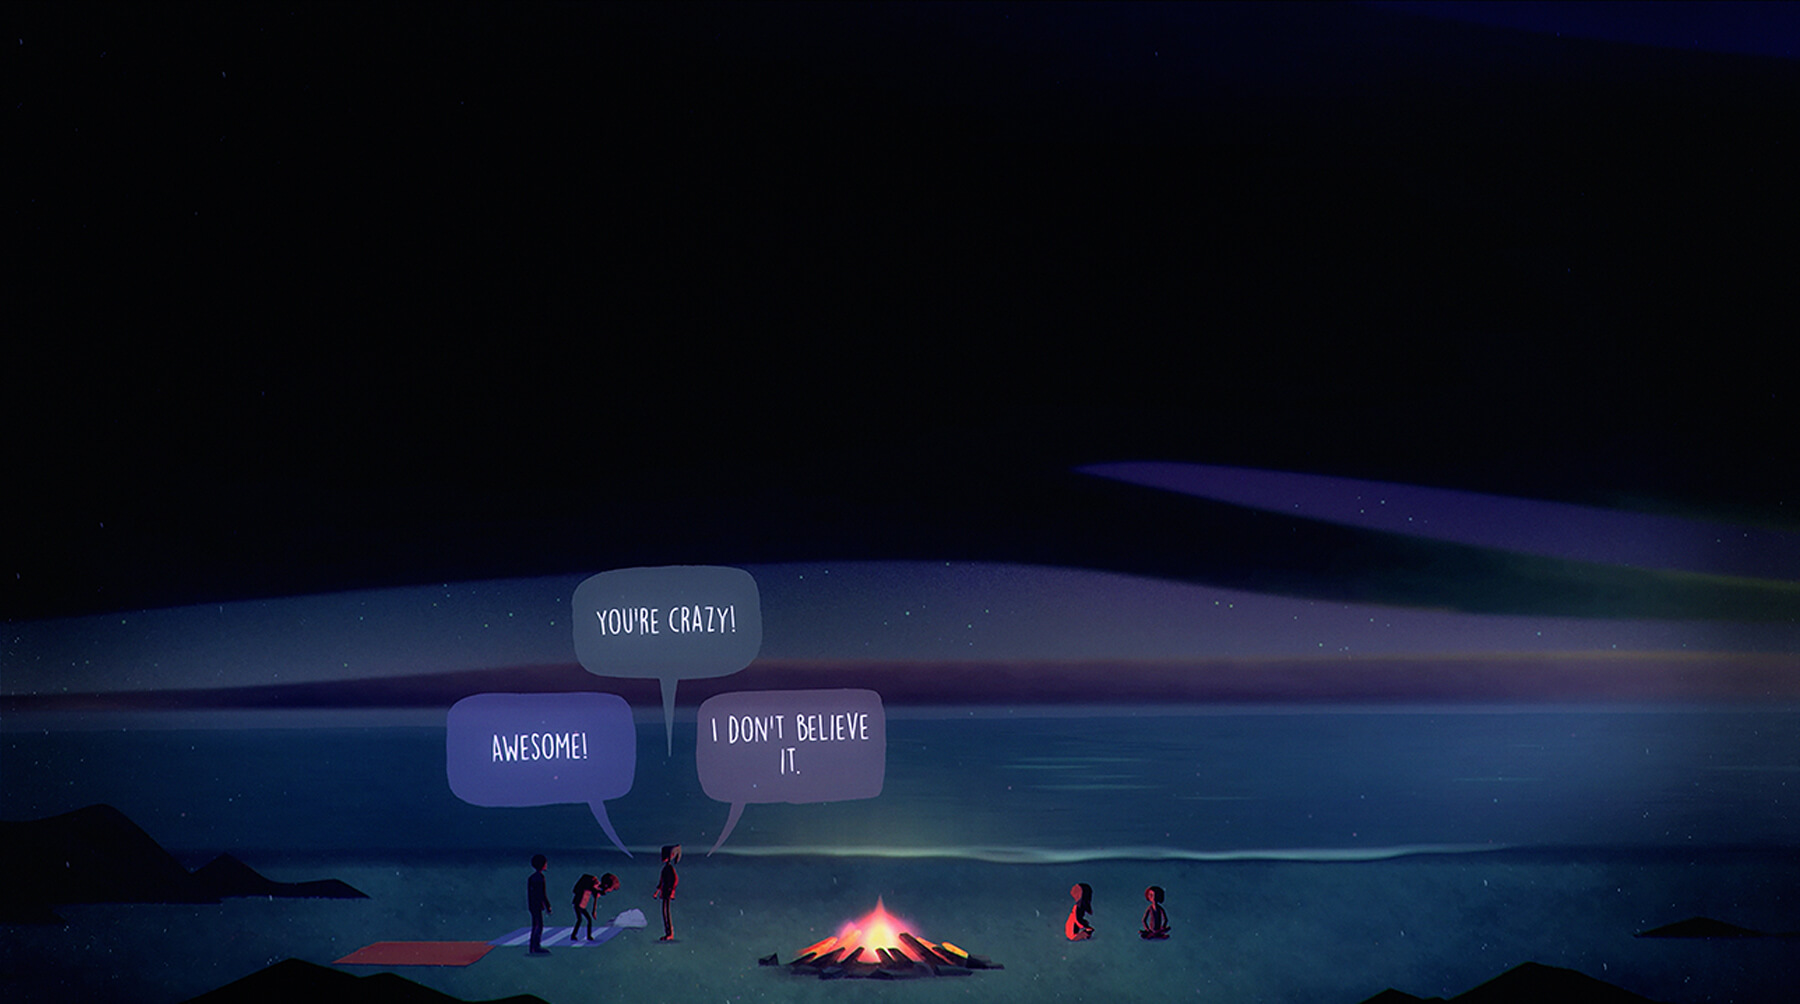 Screenshot from Oxenfree of teenaged characters saying "Awesome!", "You're crazy!", "I don't believe it." at a campfire by a lake